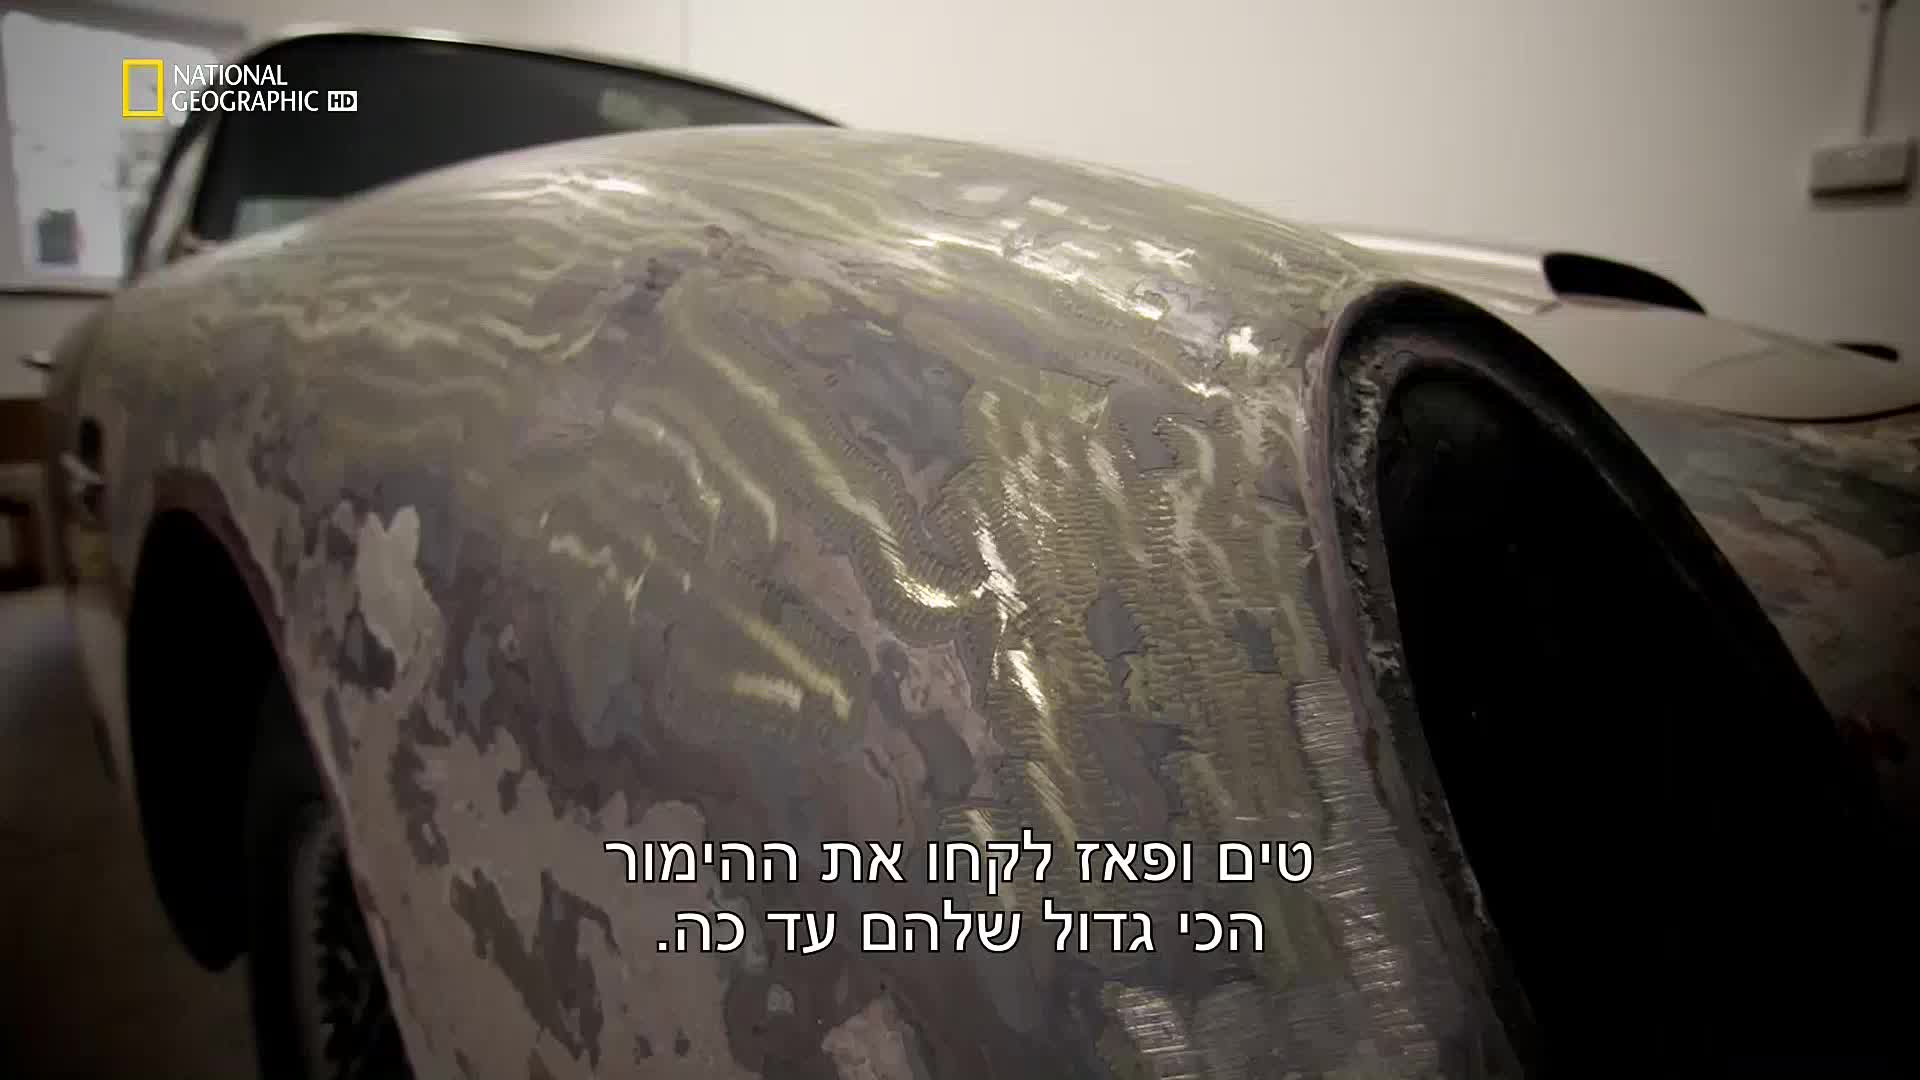 VIP IL NATIONAL GEOGRAPHIC HD - HEBREW